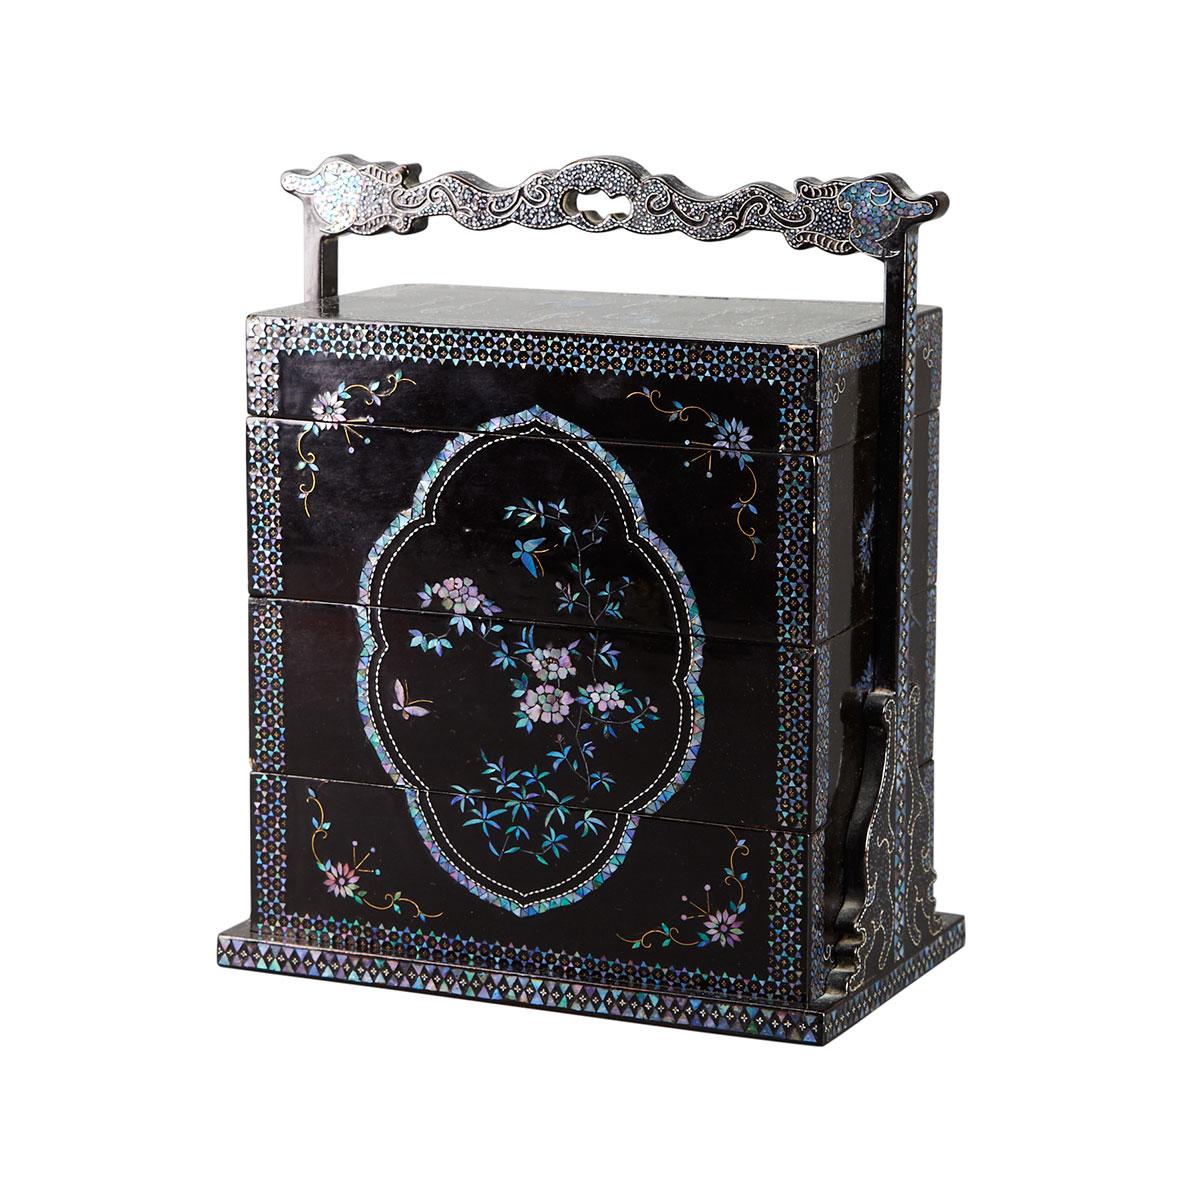 Three-Tier Black Lacquer  Scholar’s Box, Late Qing Dynasty